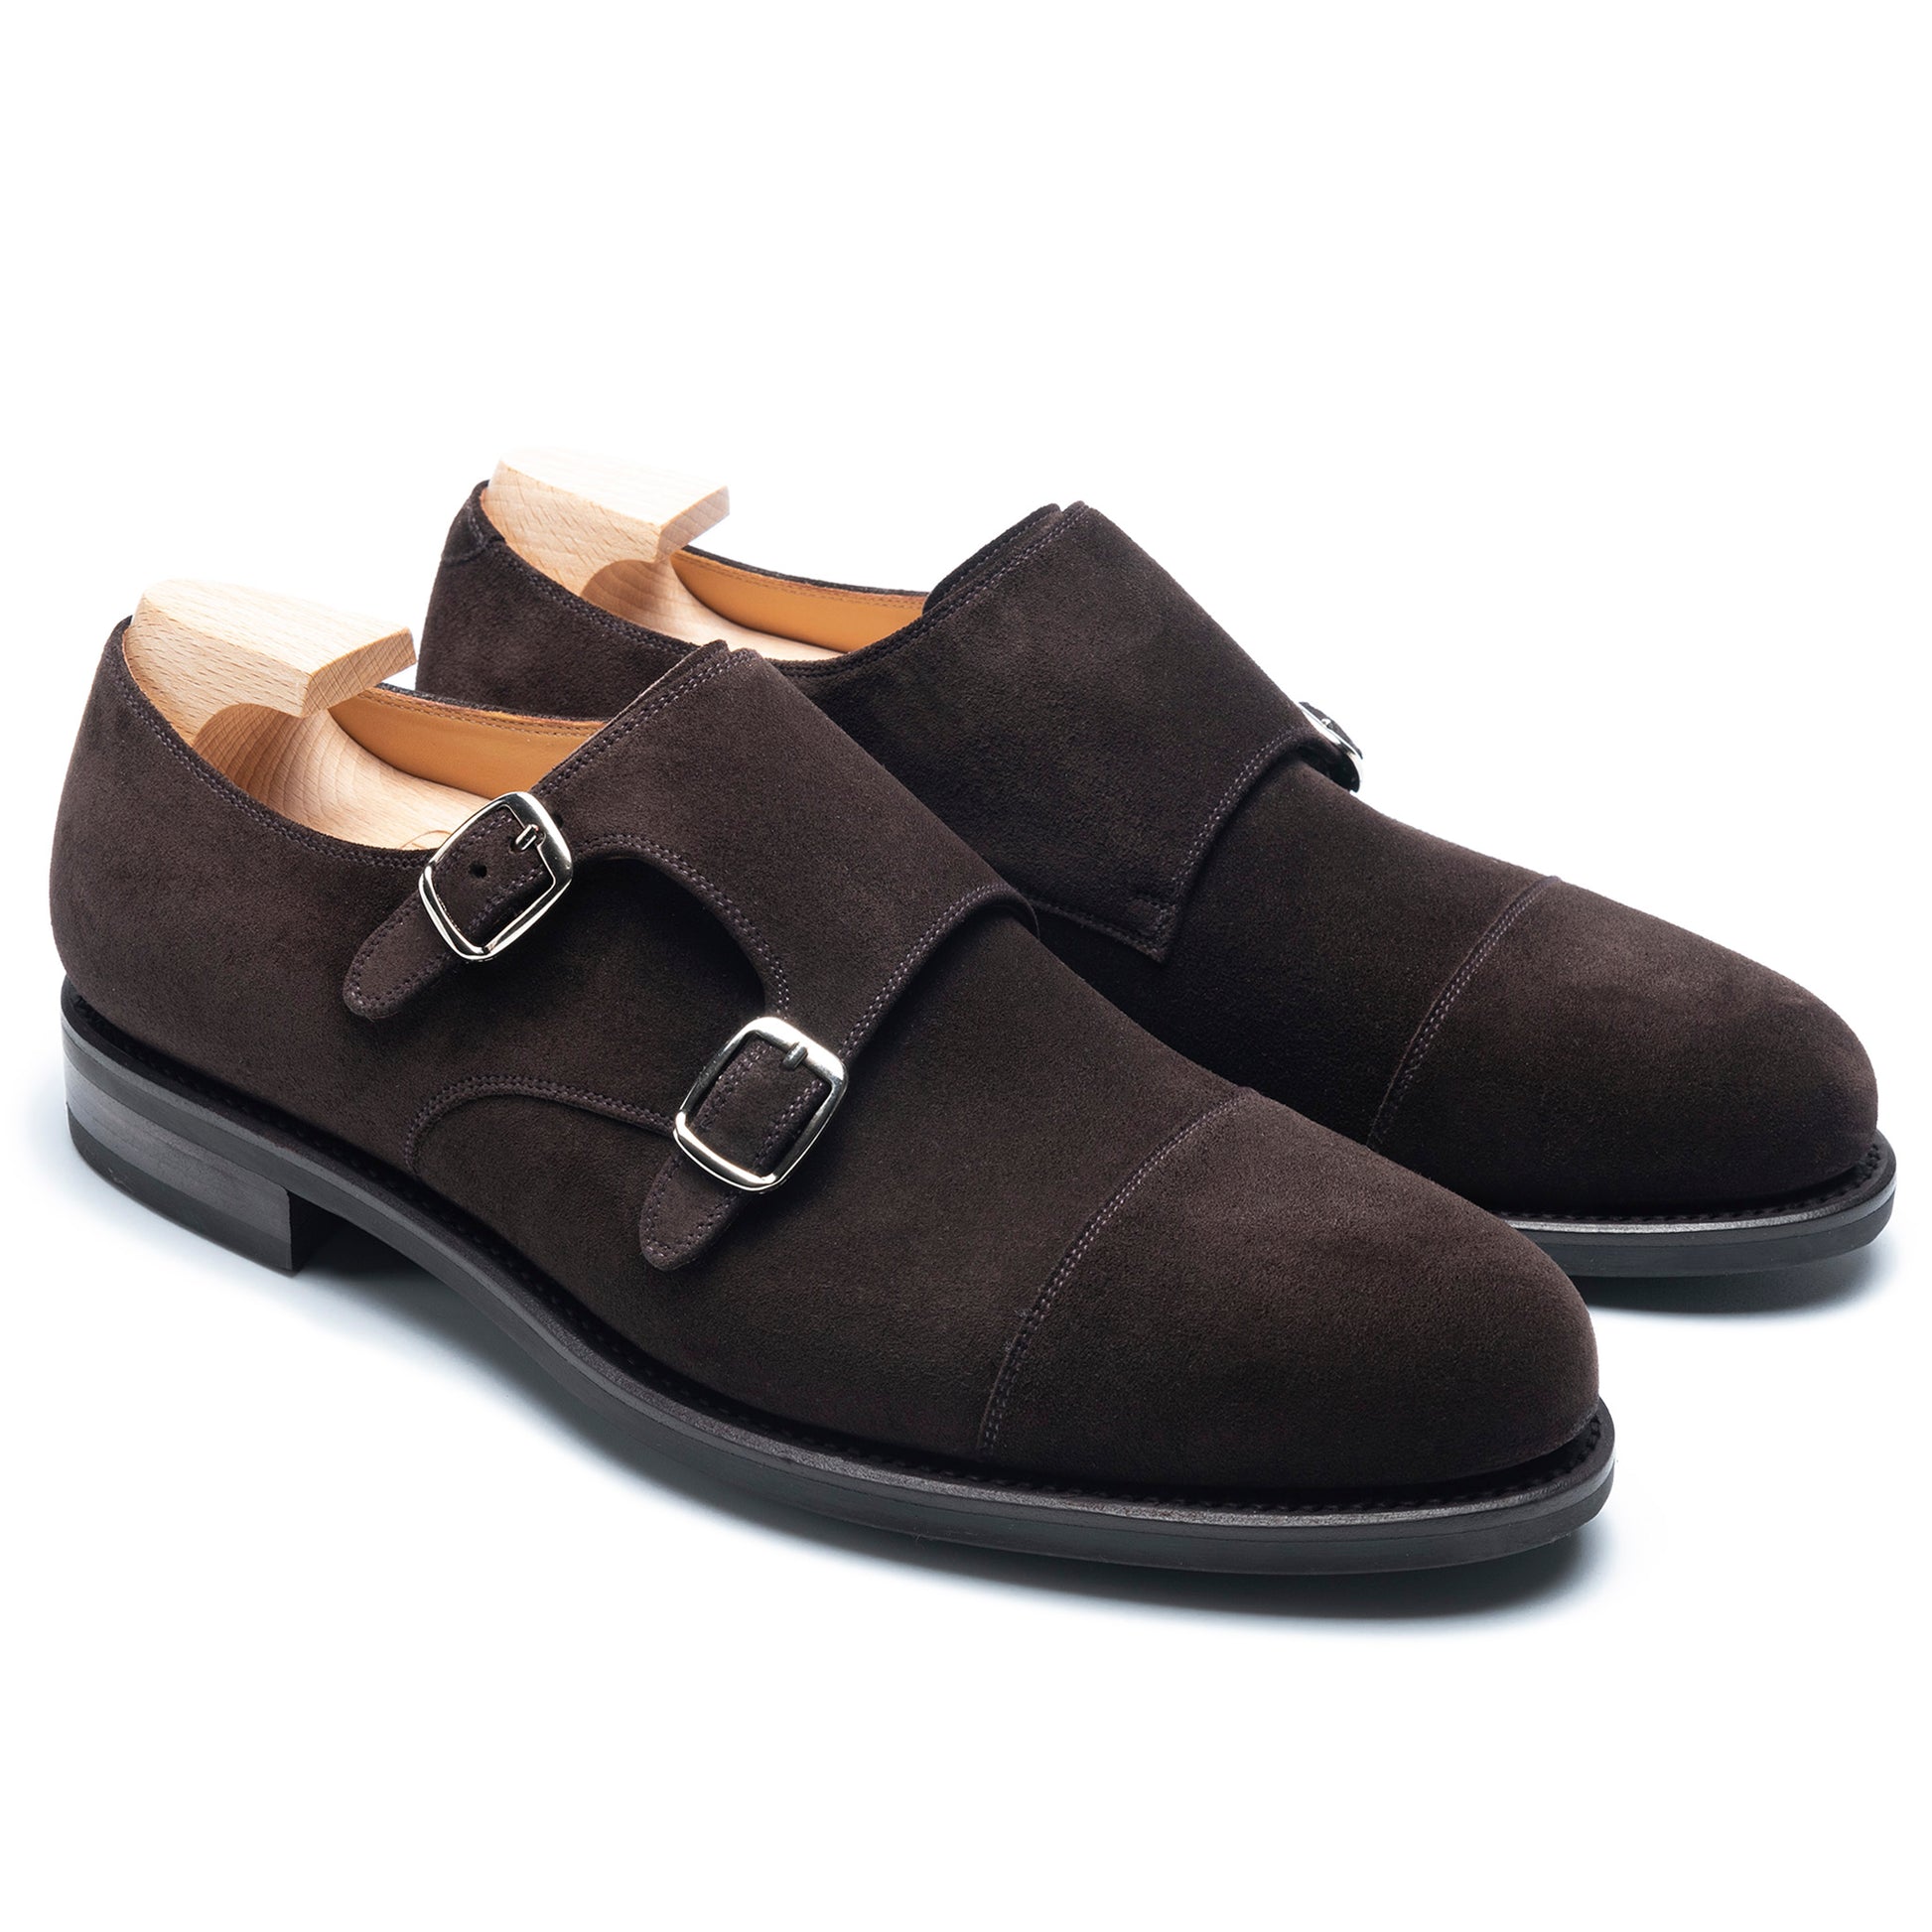 TLB Mallorca leather shoes 690 / MADISON / ANTE BROWN